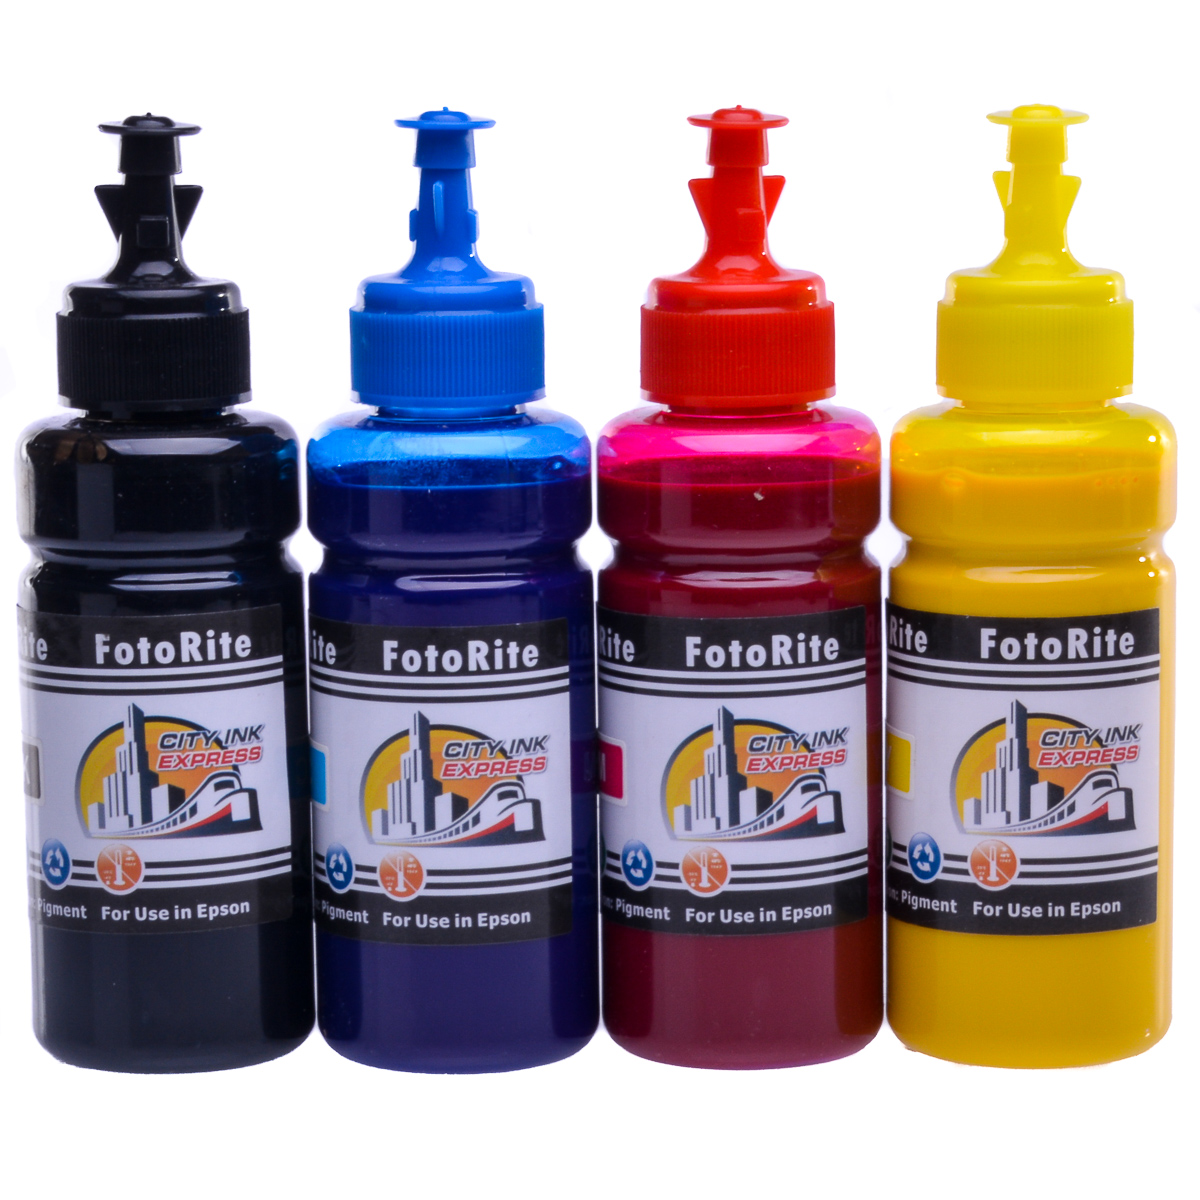 Cheap Multipack pigment ink refill replaces Epson XP-2155